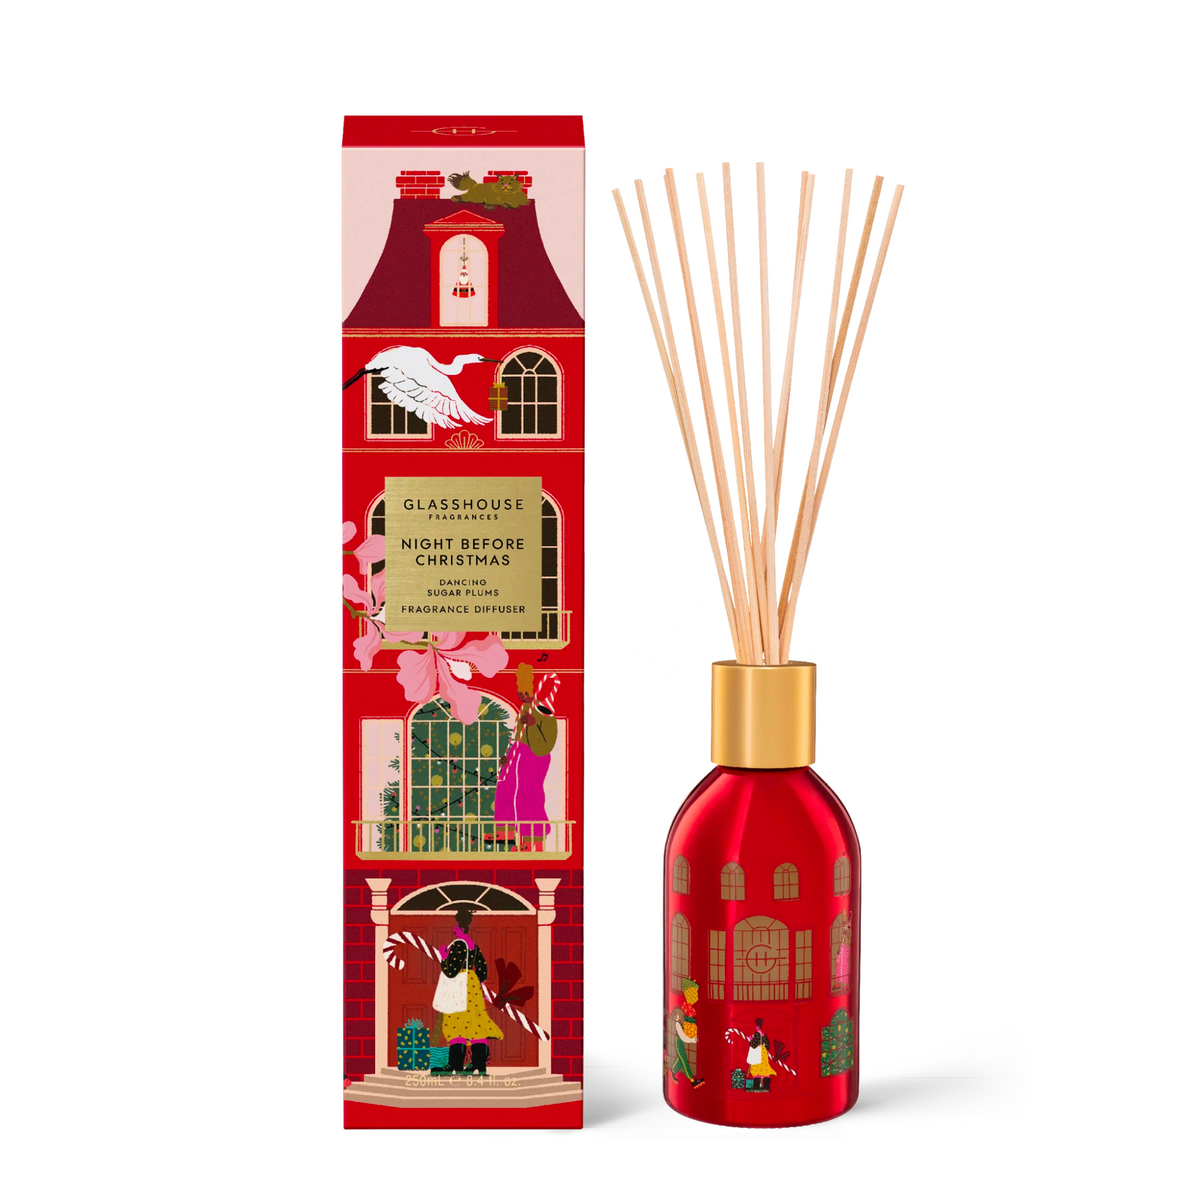 Primary Image of Night Before Christmas Diffuser